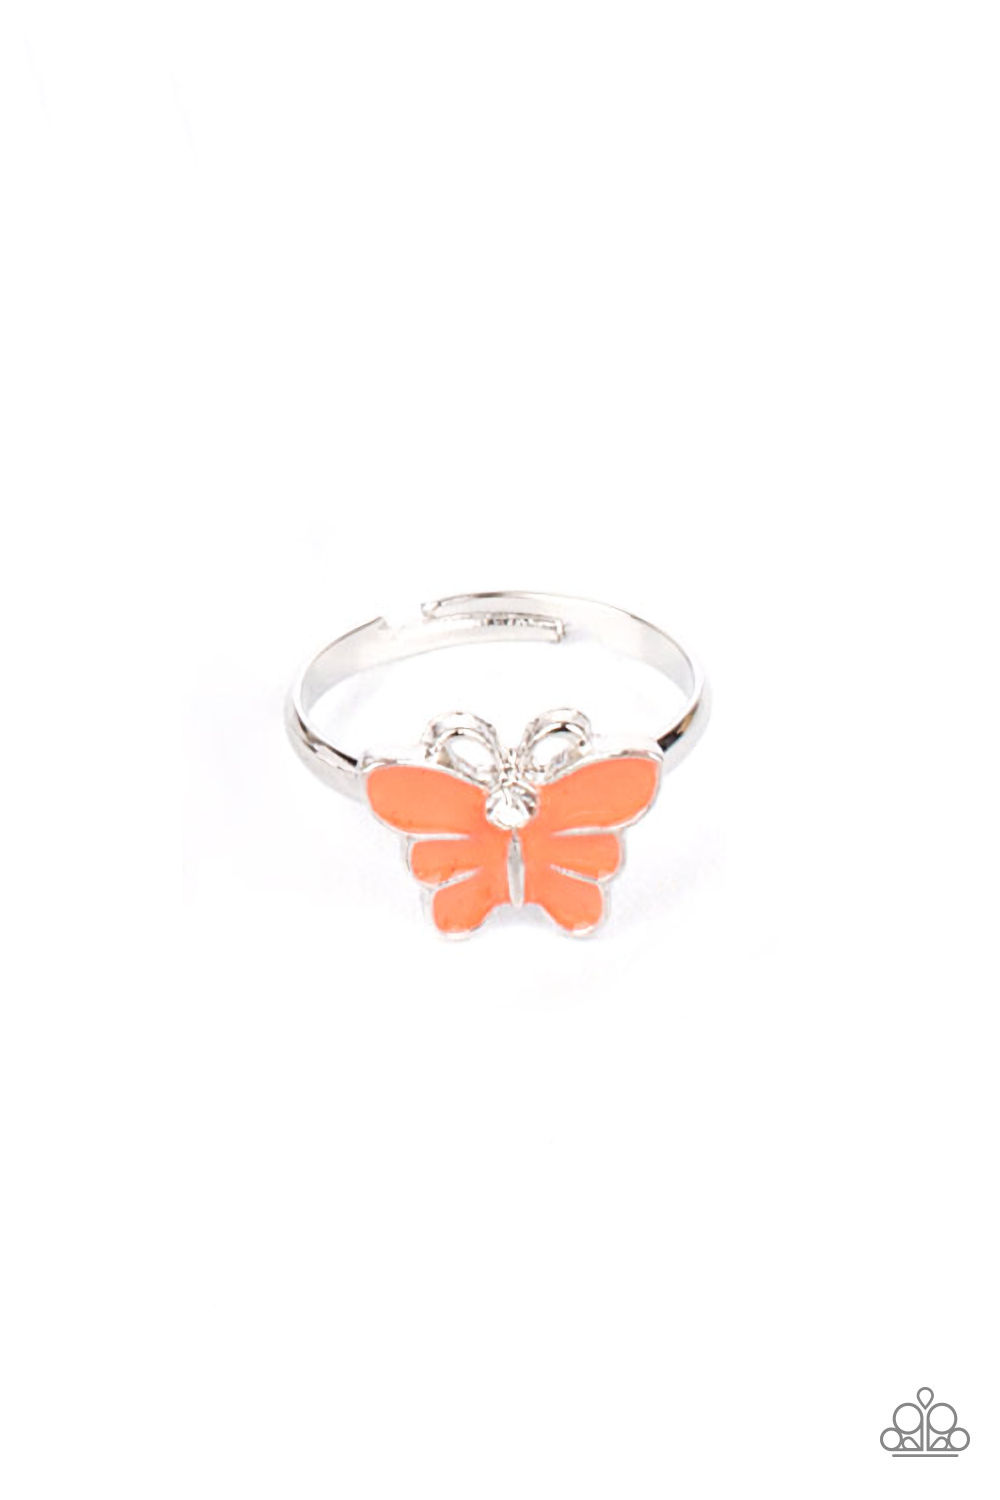 Ring - Starlet Shimmer Butterfly/Rhinestone - Coral